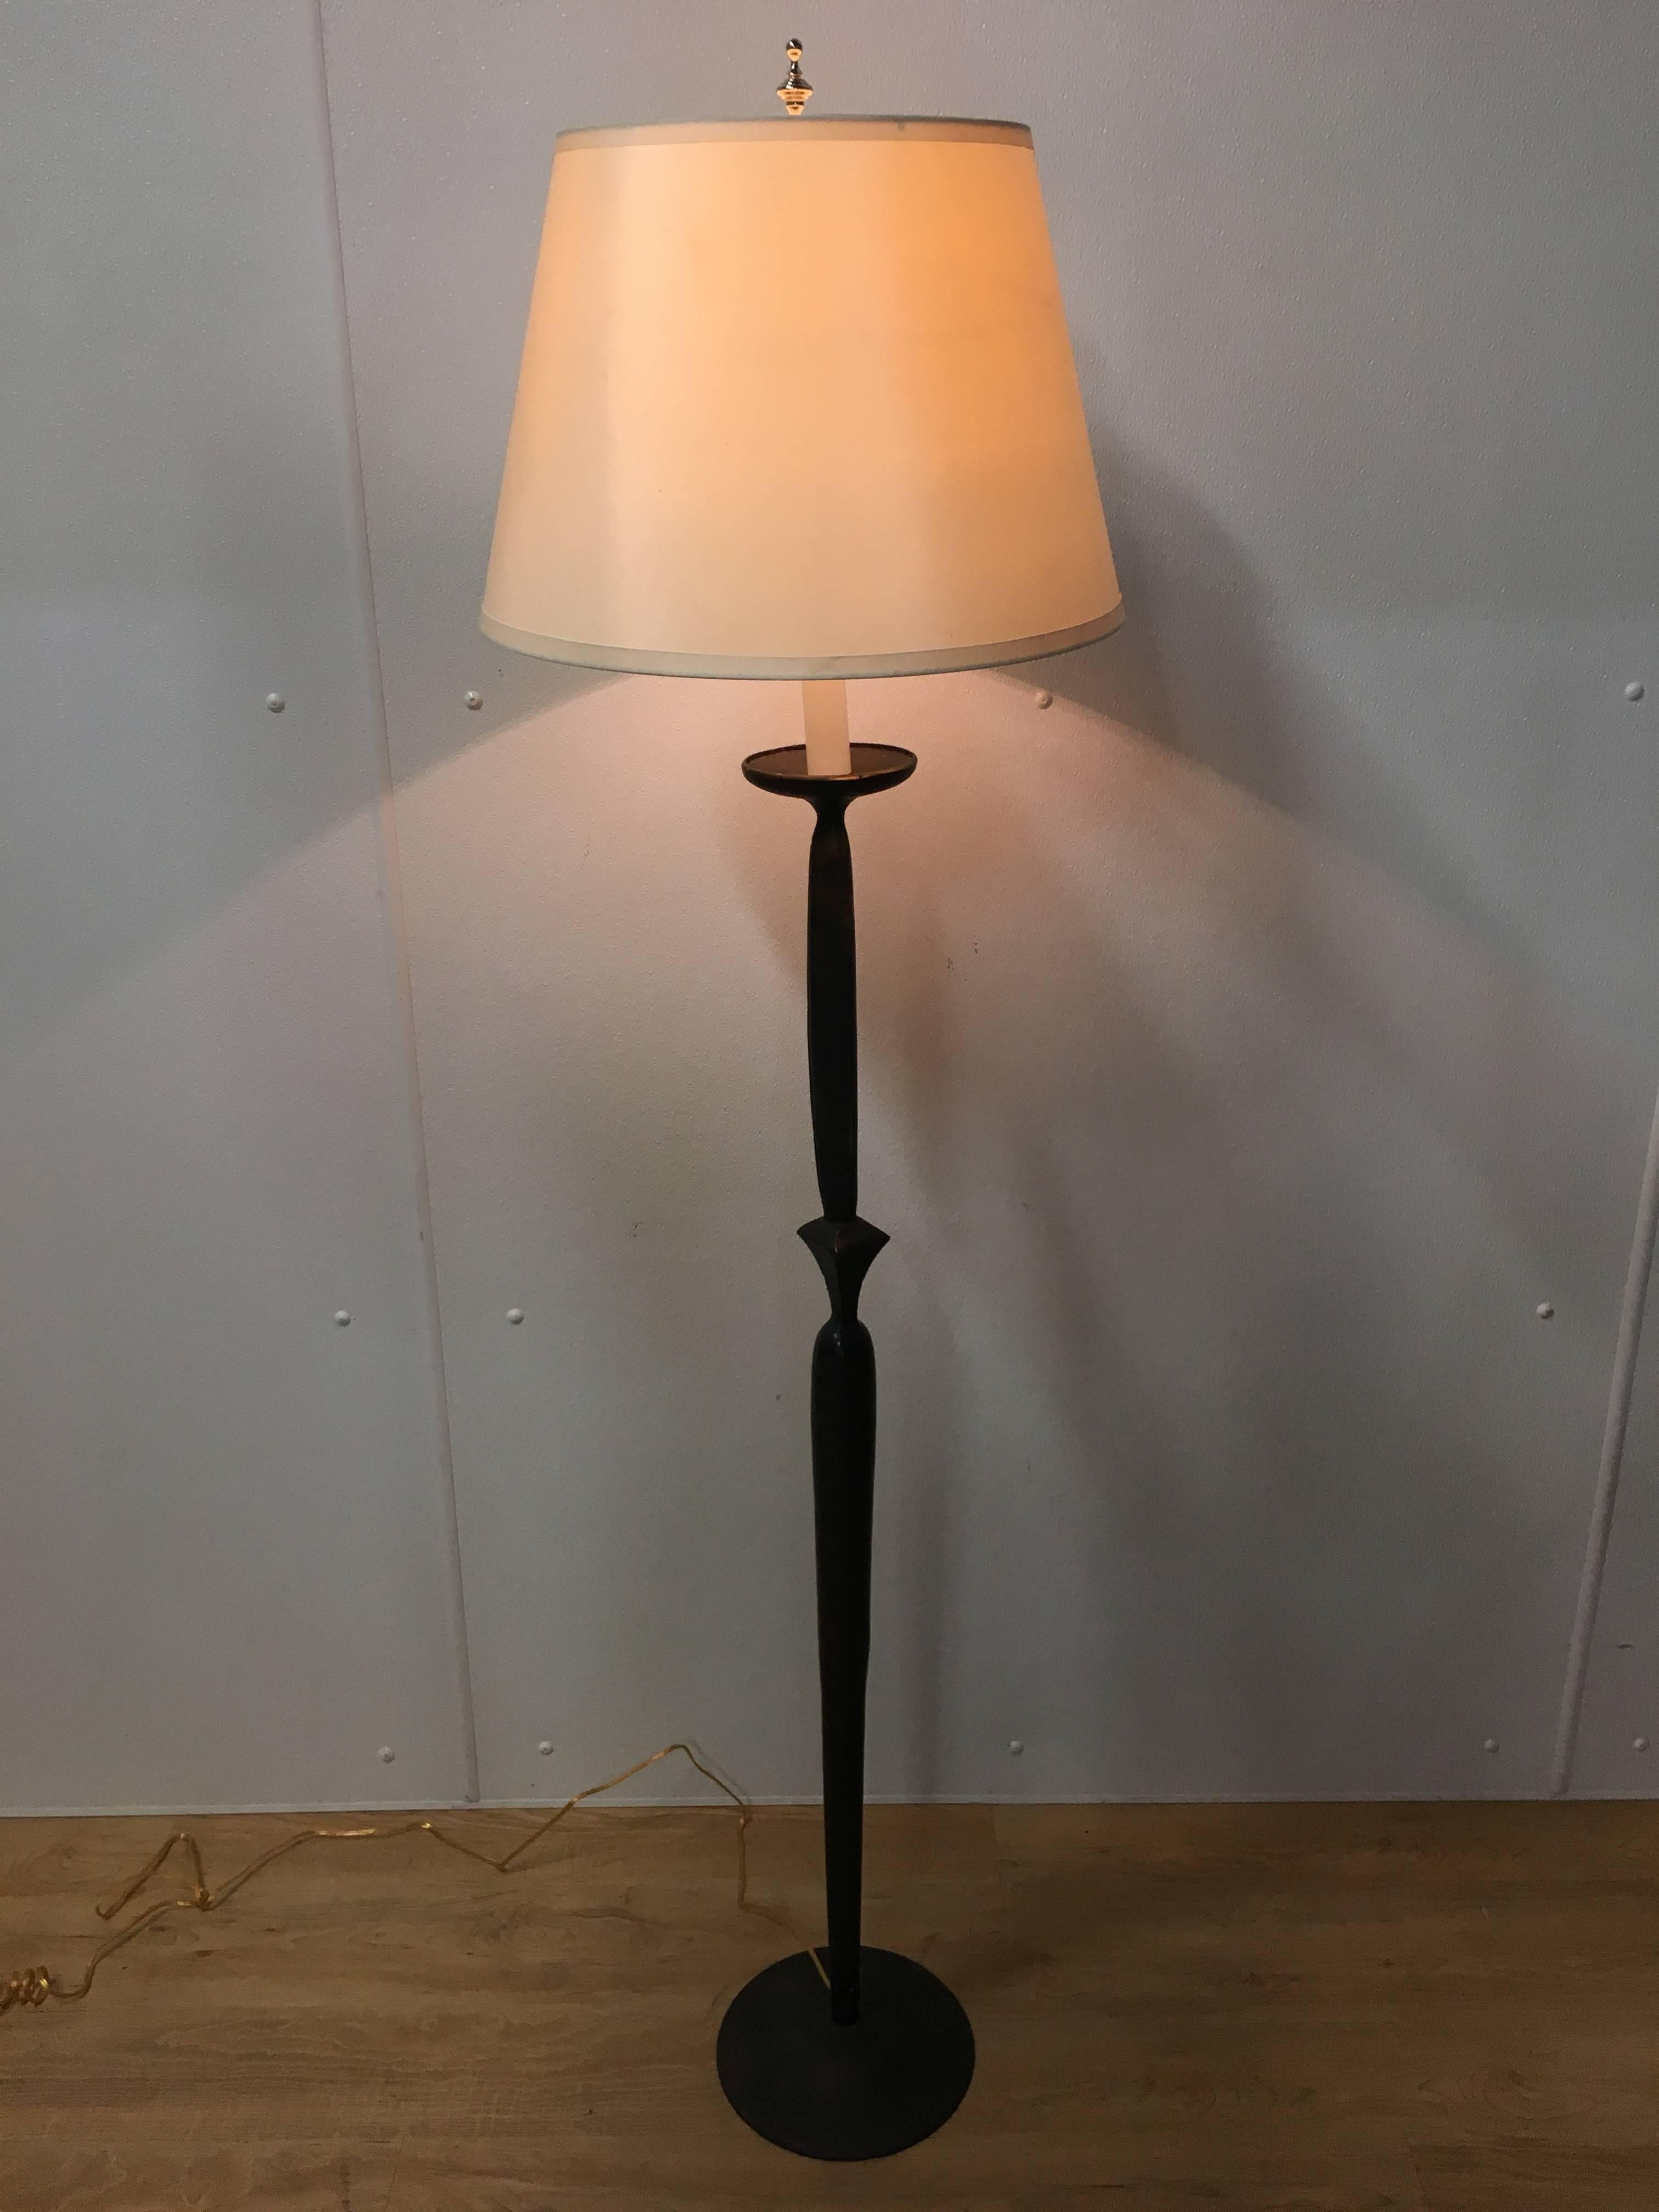 Giacometti stye bronze floor lamp. Heavy bronze construction and great curved base.